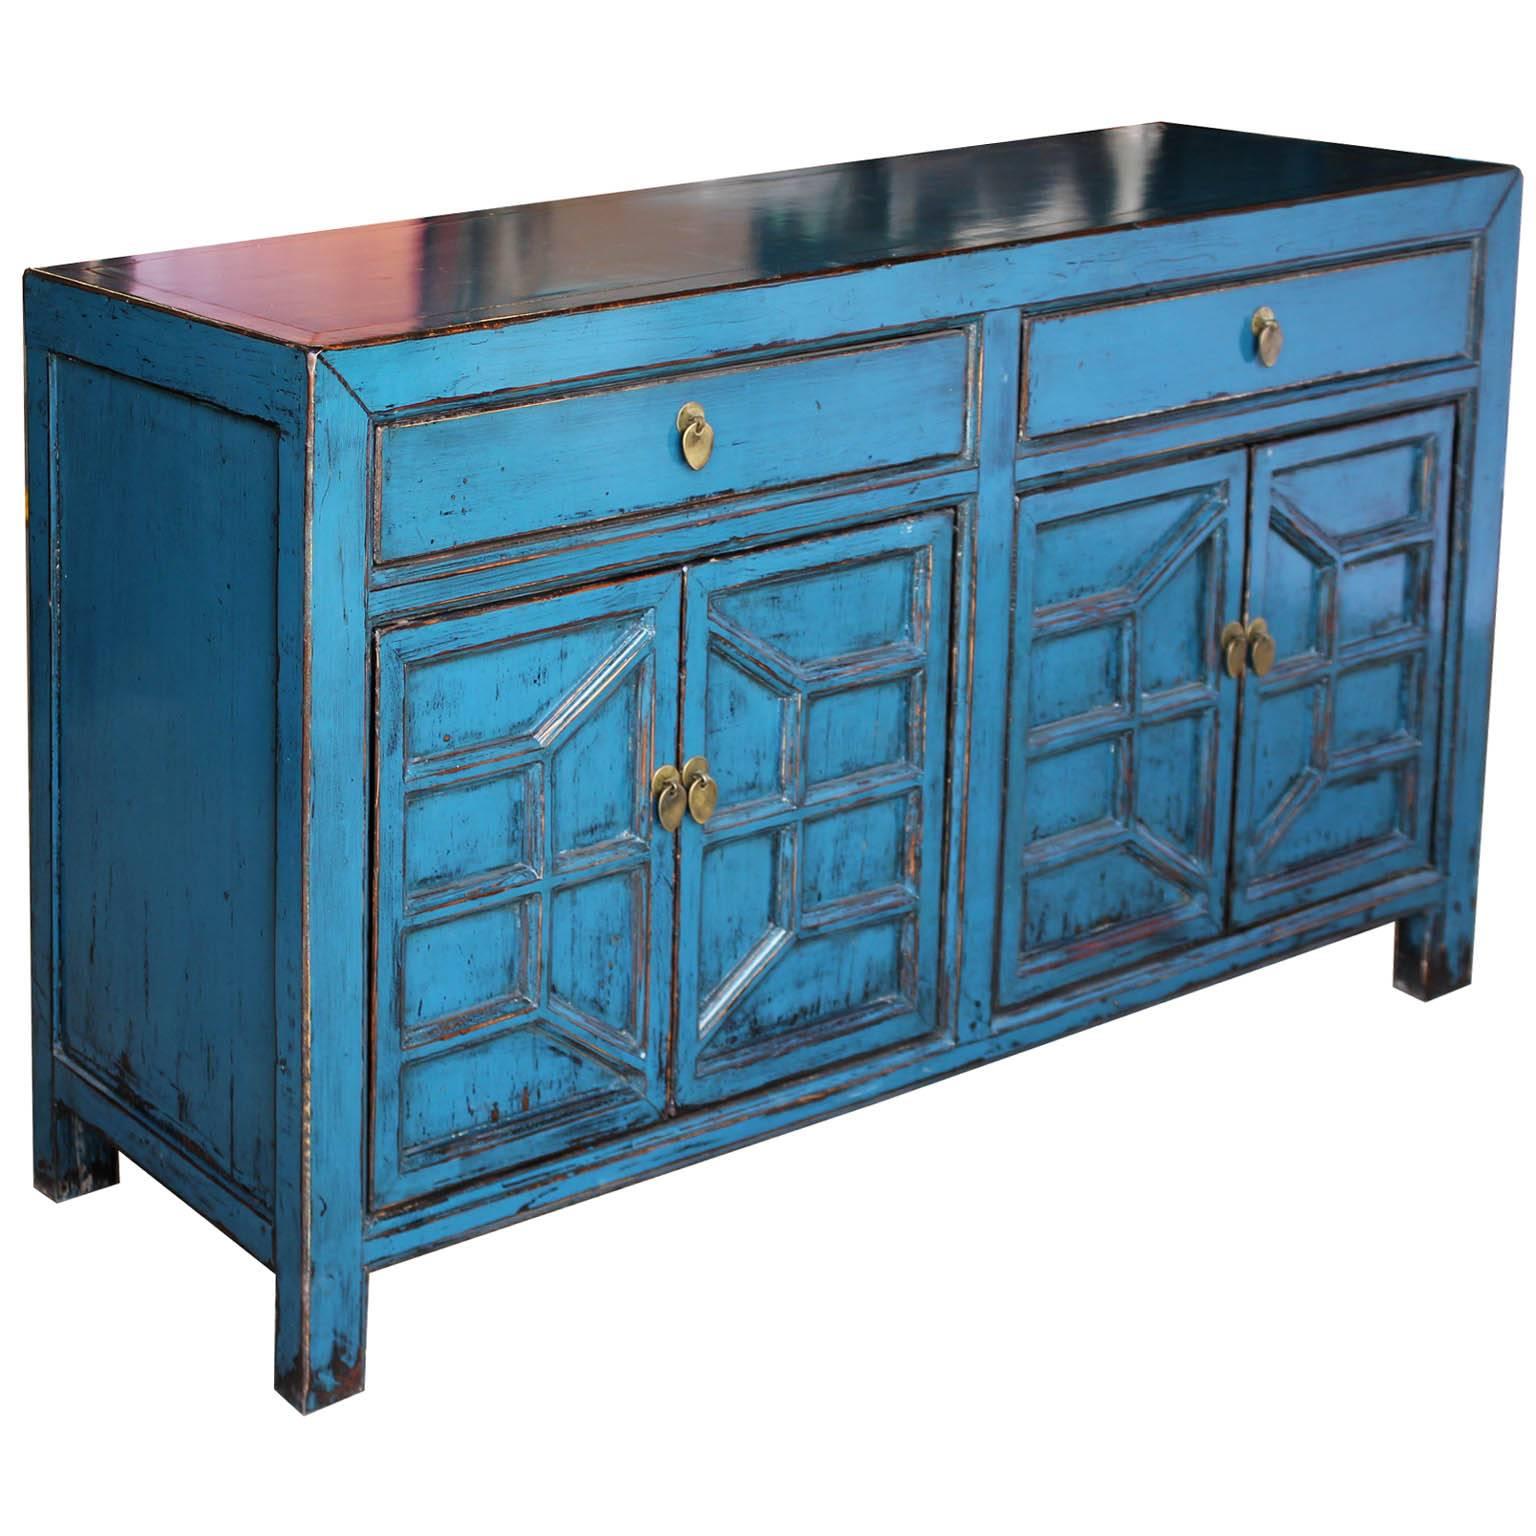 Contemporary blue lacquer sideboard with geometric patterned doors brings a pop of color to the living or dining room.